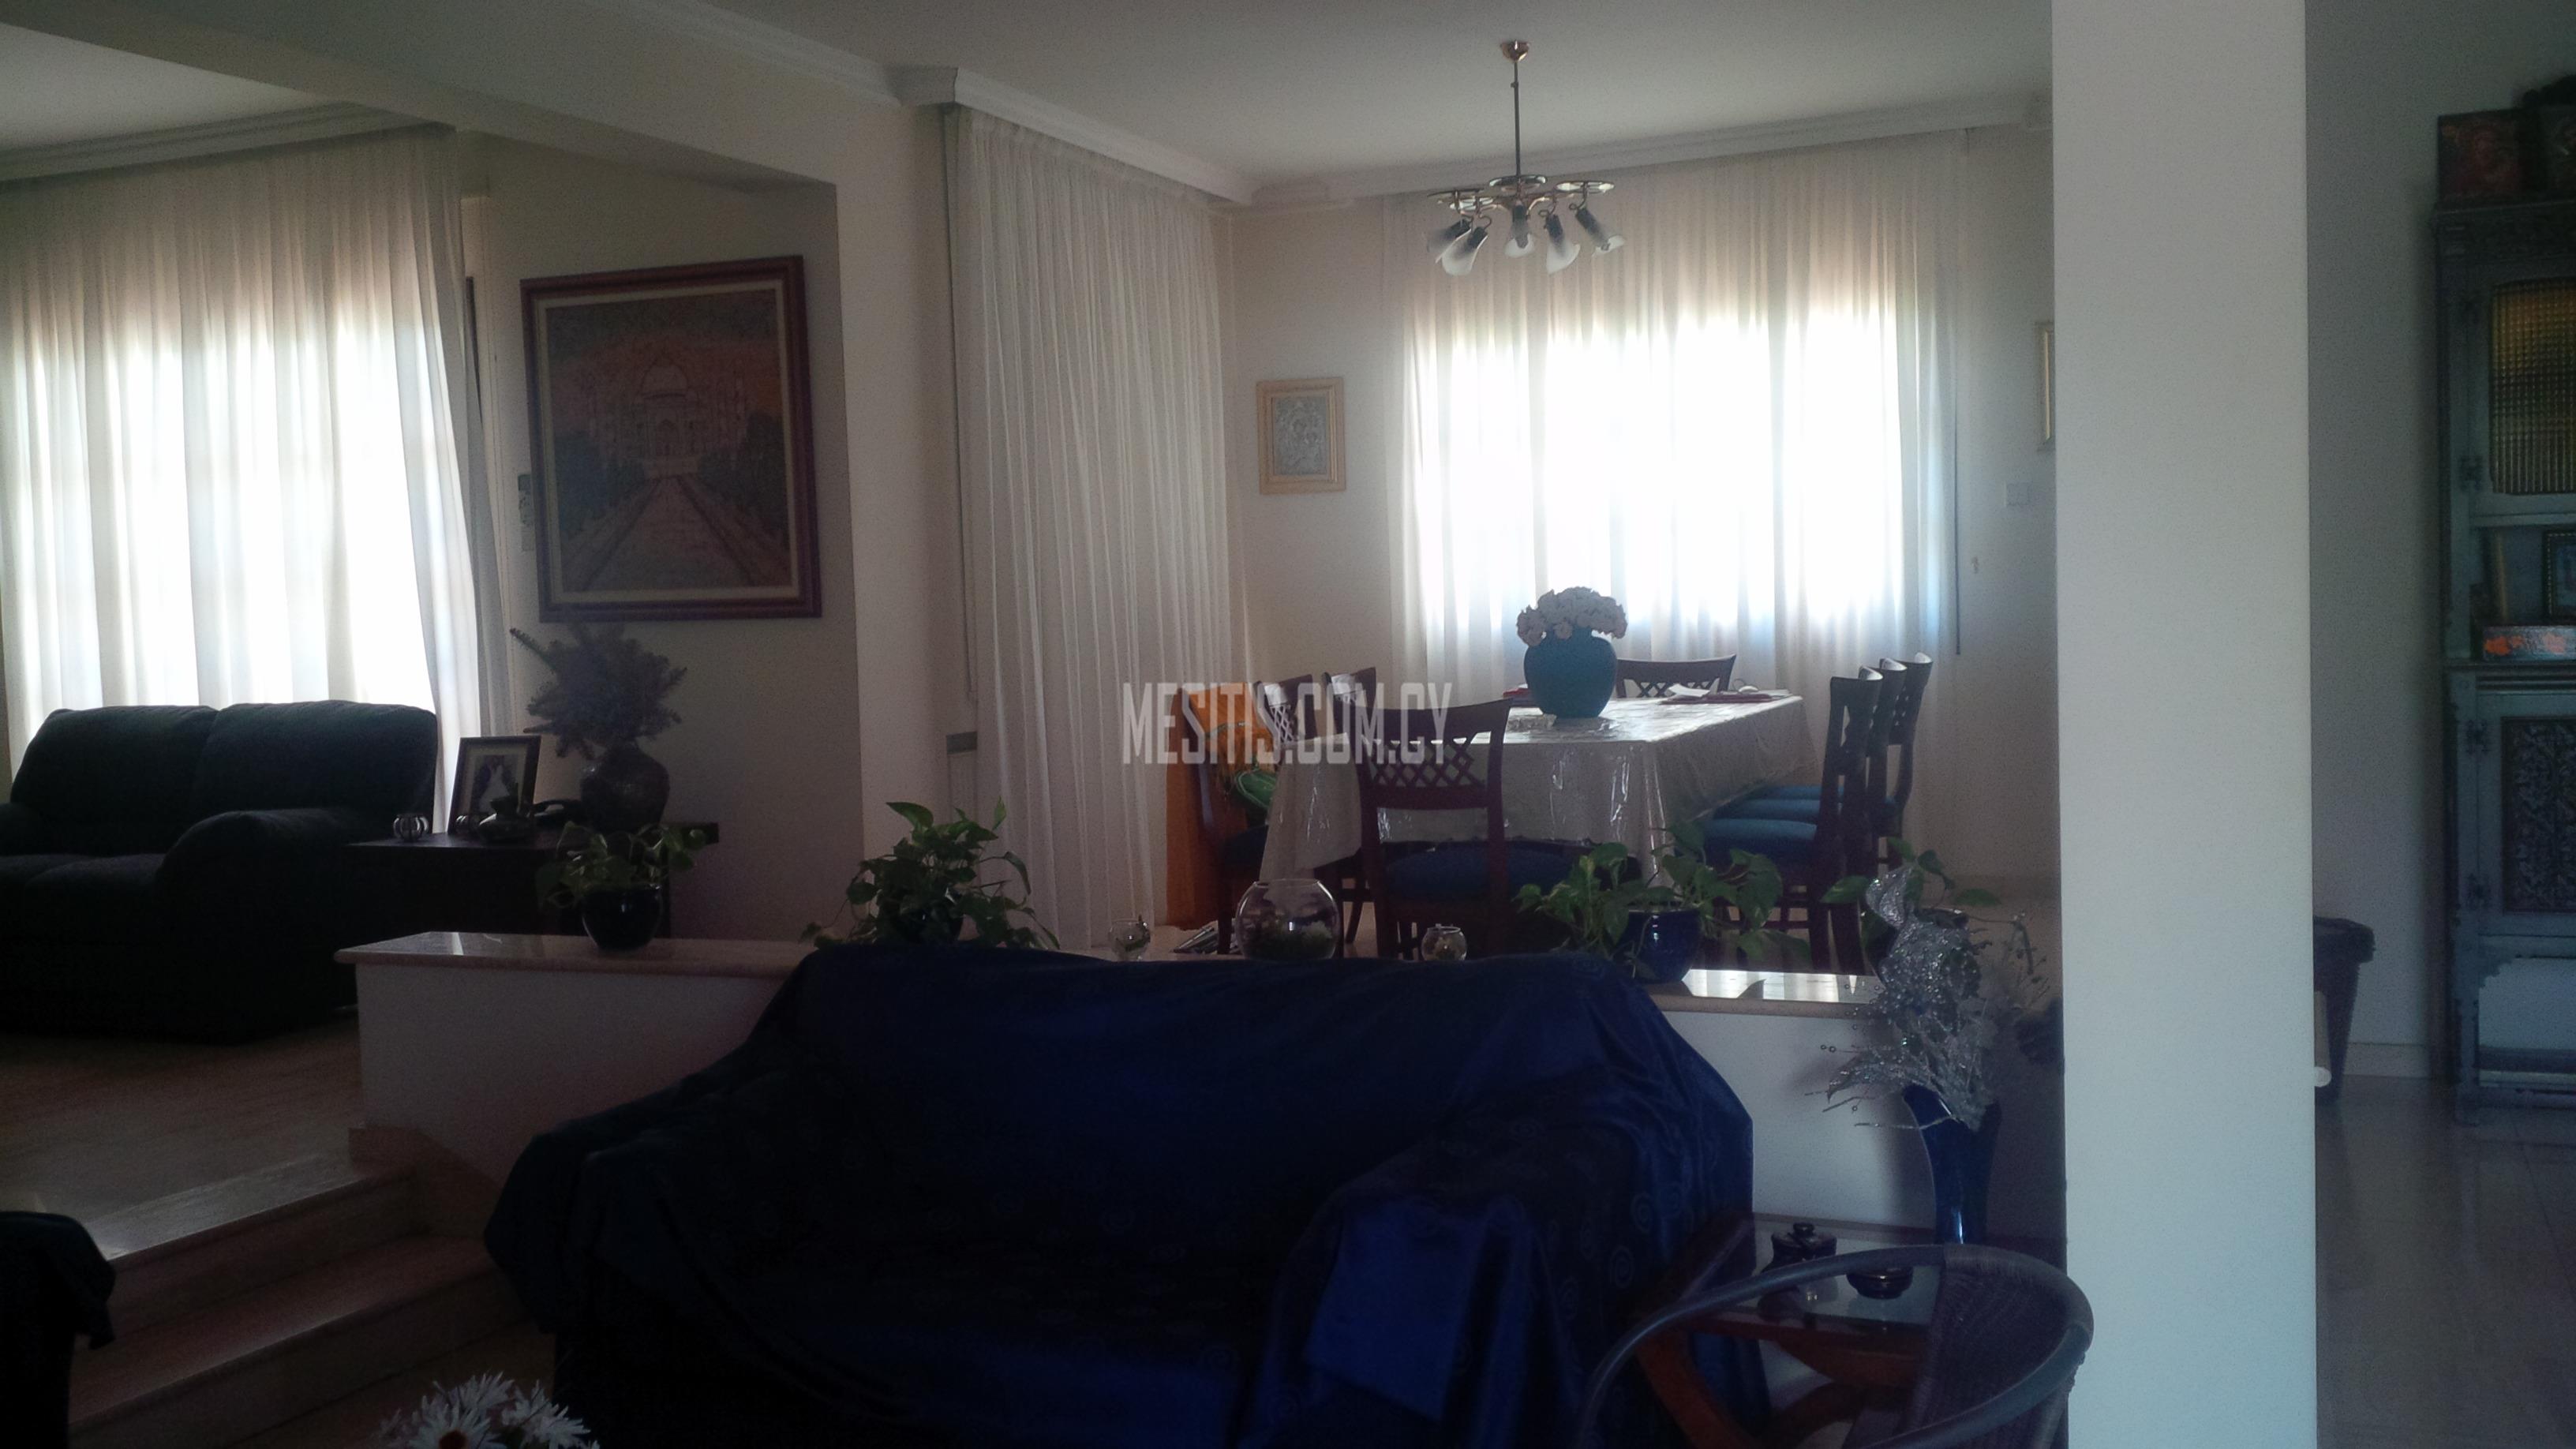 4 Bedroom Luxury House For Rent Or For Sale In Aglantzia With Attic Separate Office Room And Big Yard #1378-1